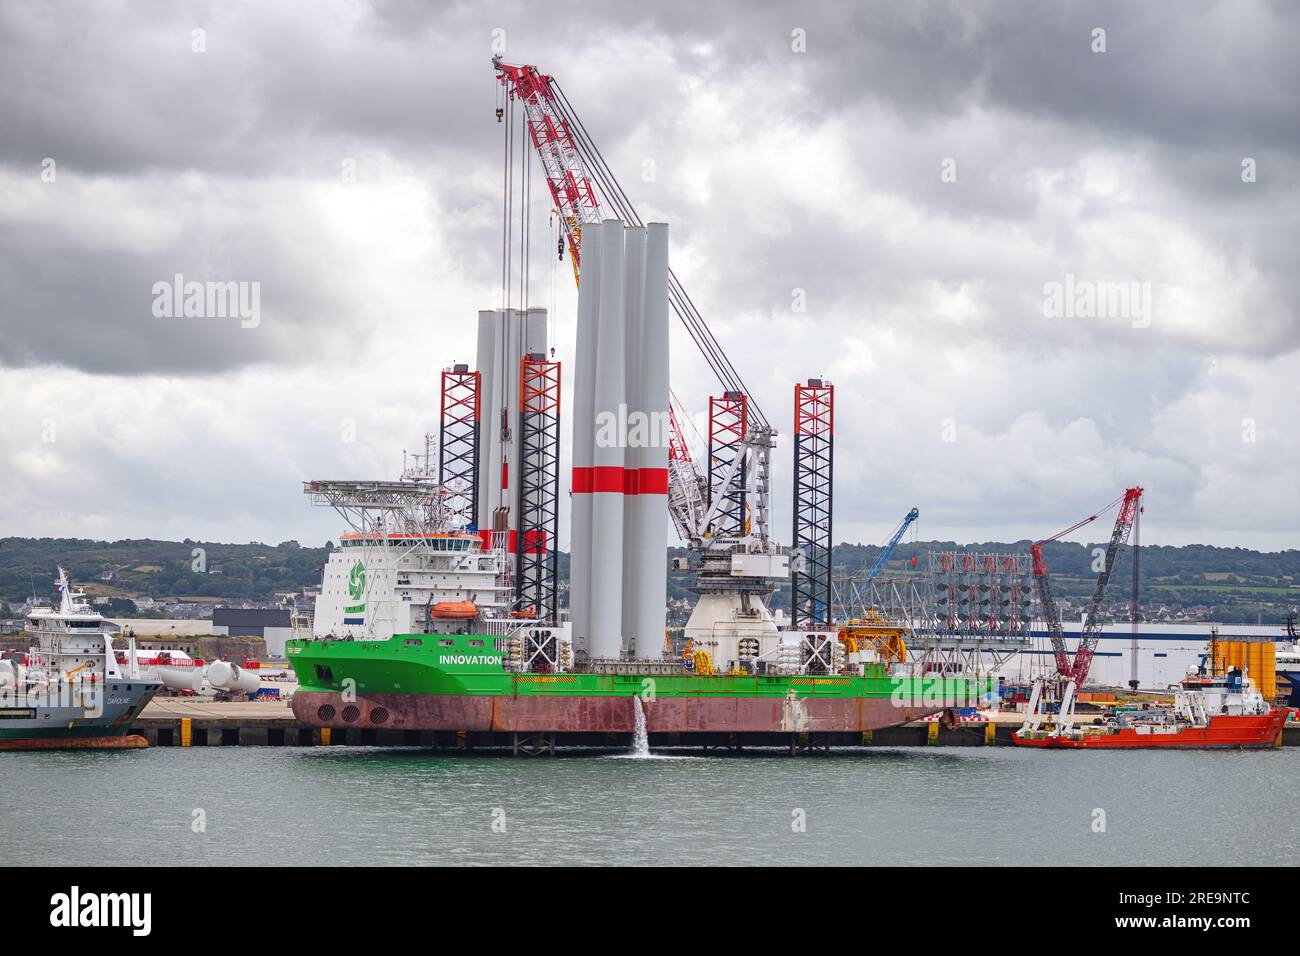 Innovation is a dynamically positioned, Offshore Heavy Lift Jack-Up Vessel. Stock Photo